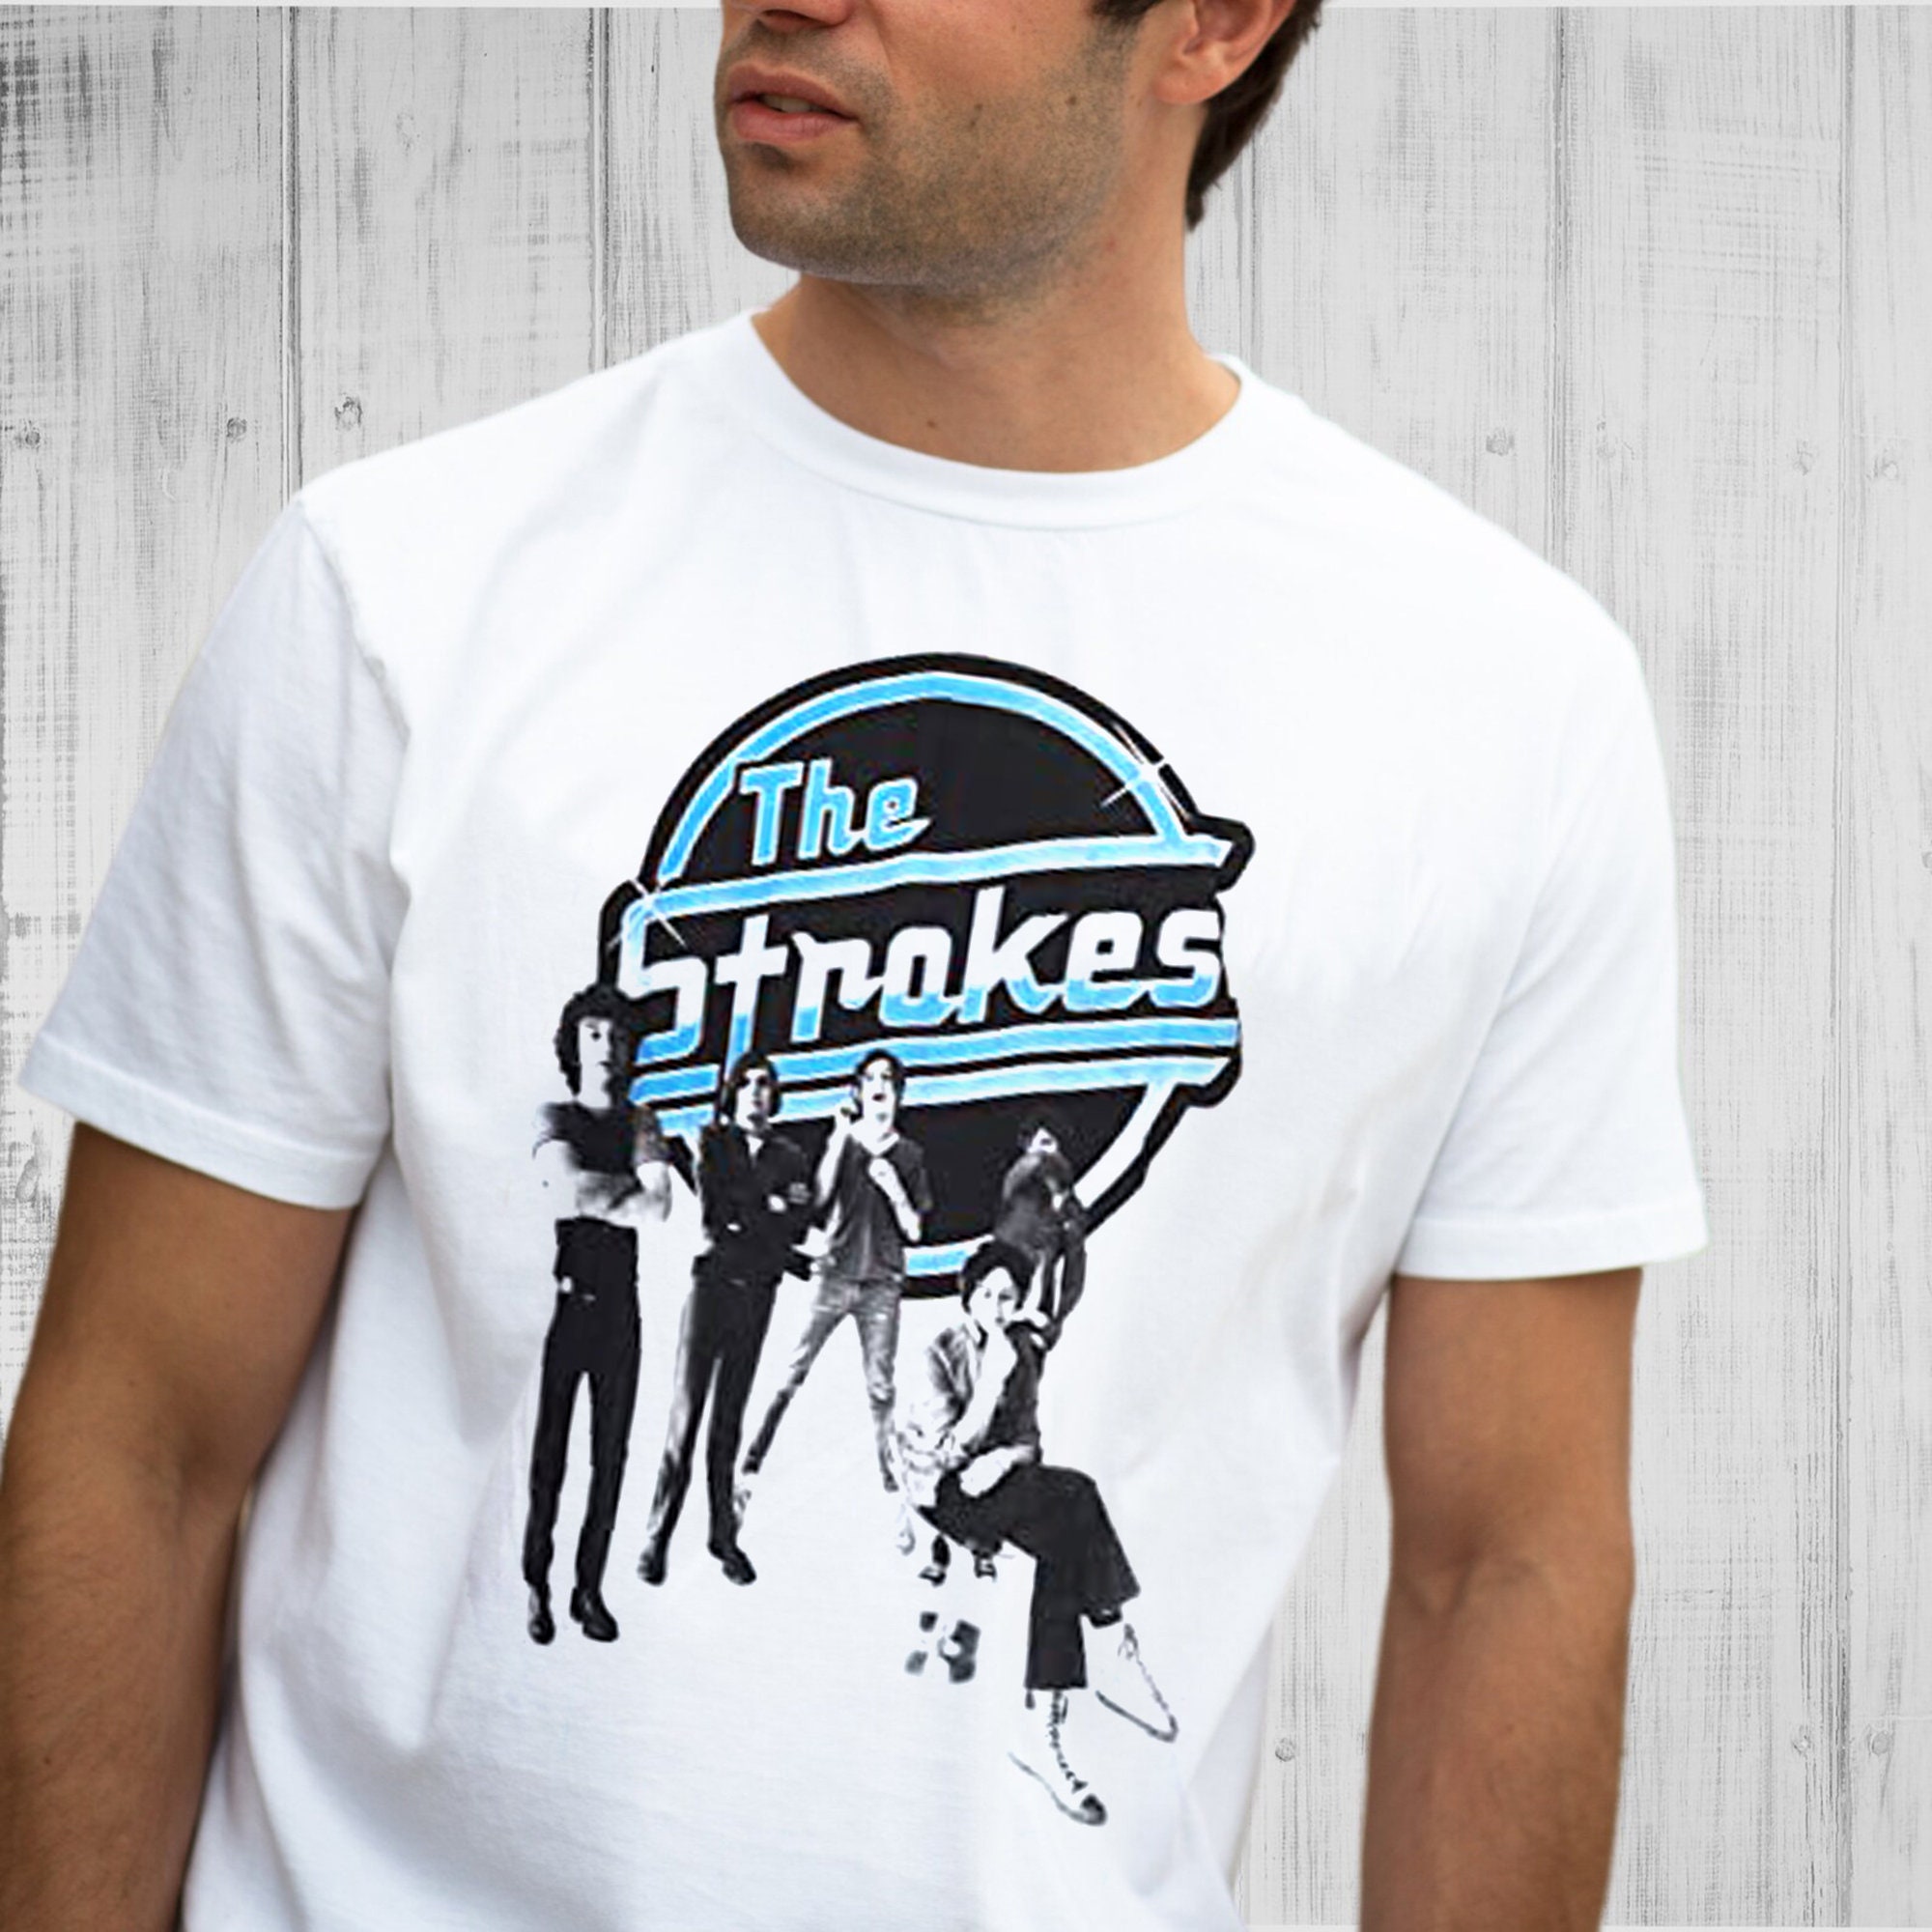 Discover The Strokes Vintage T-Shirt